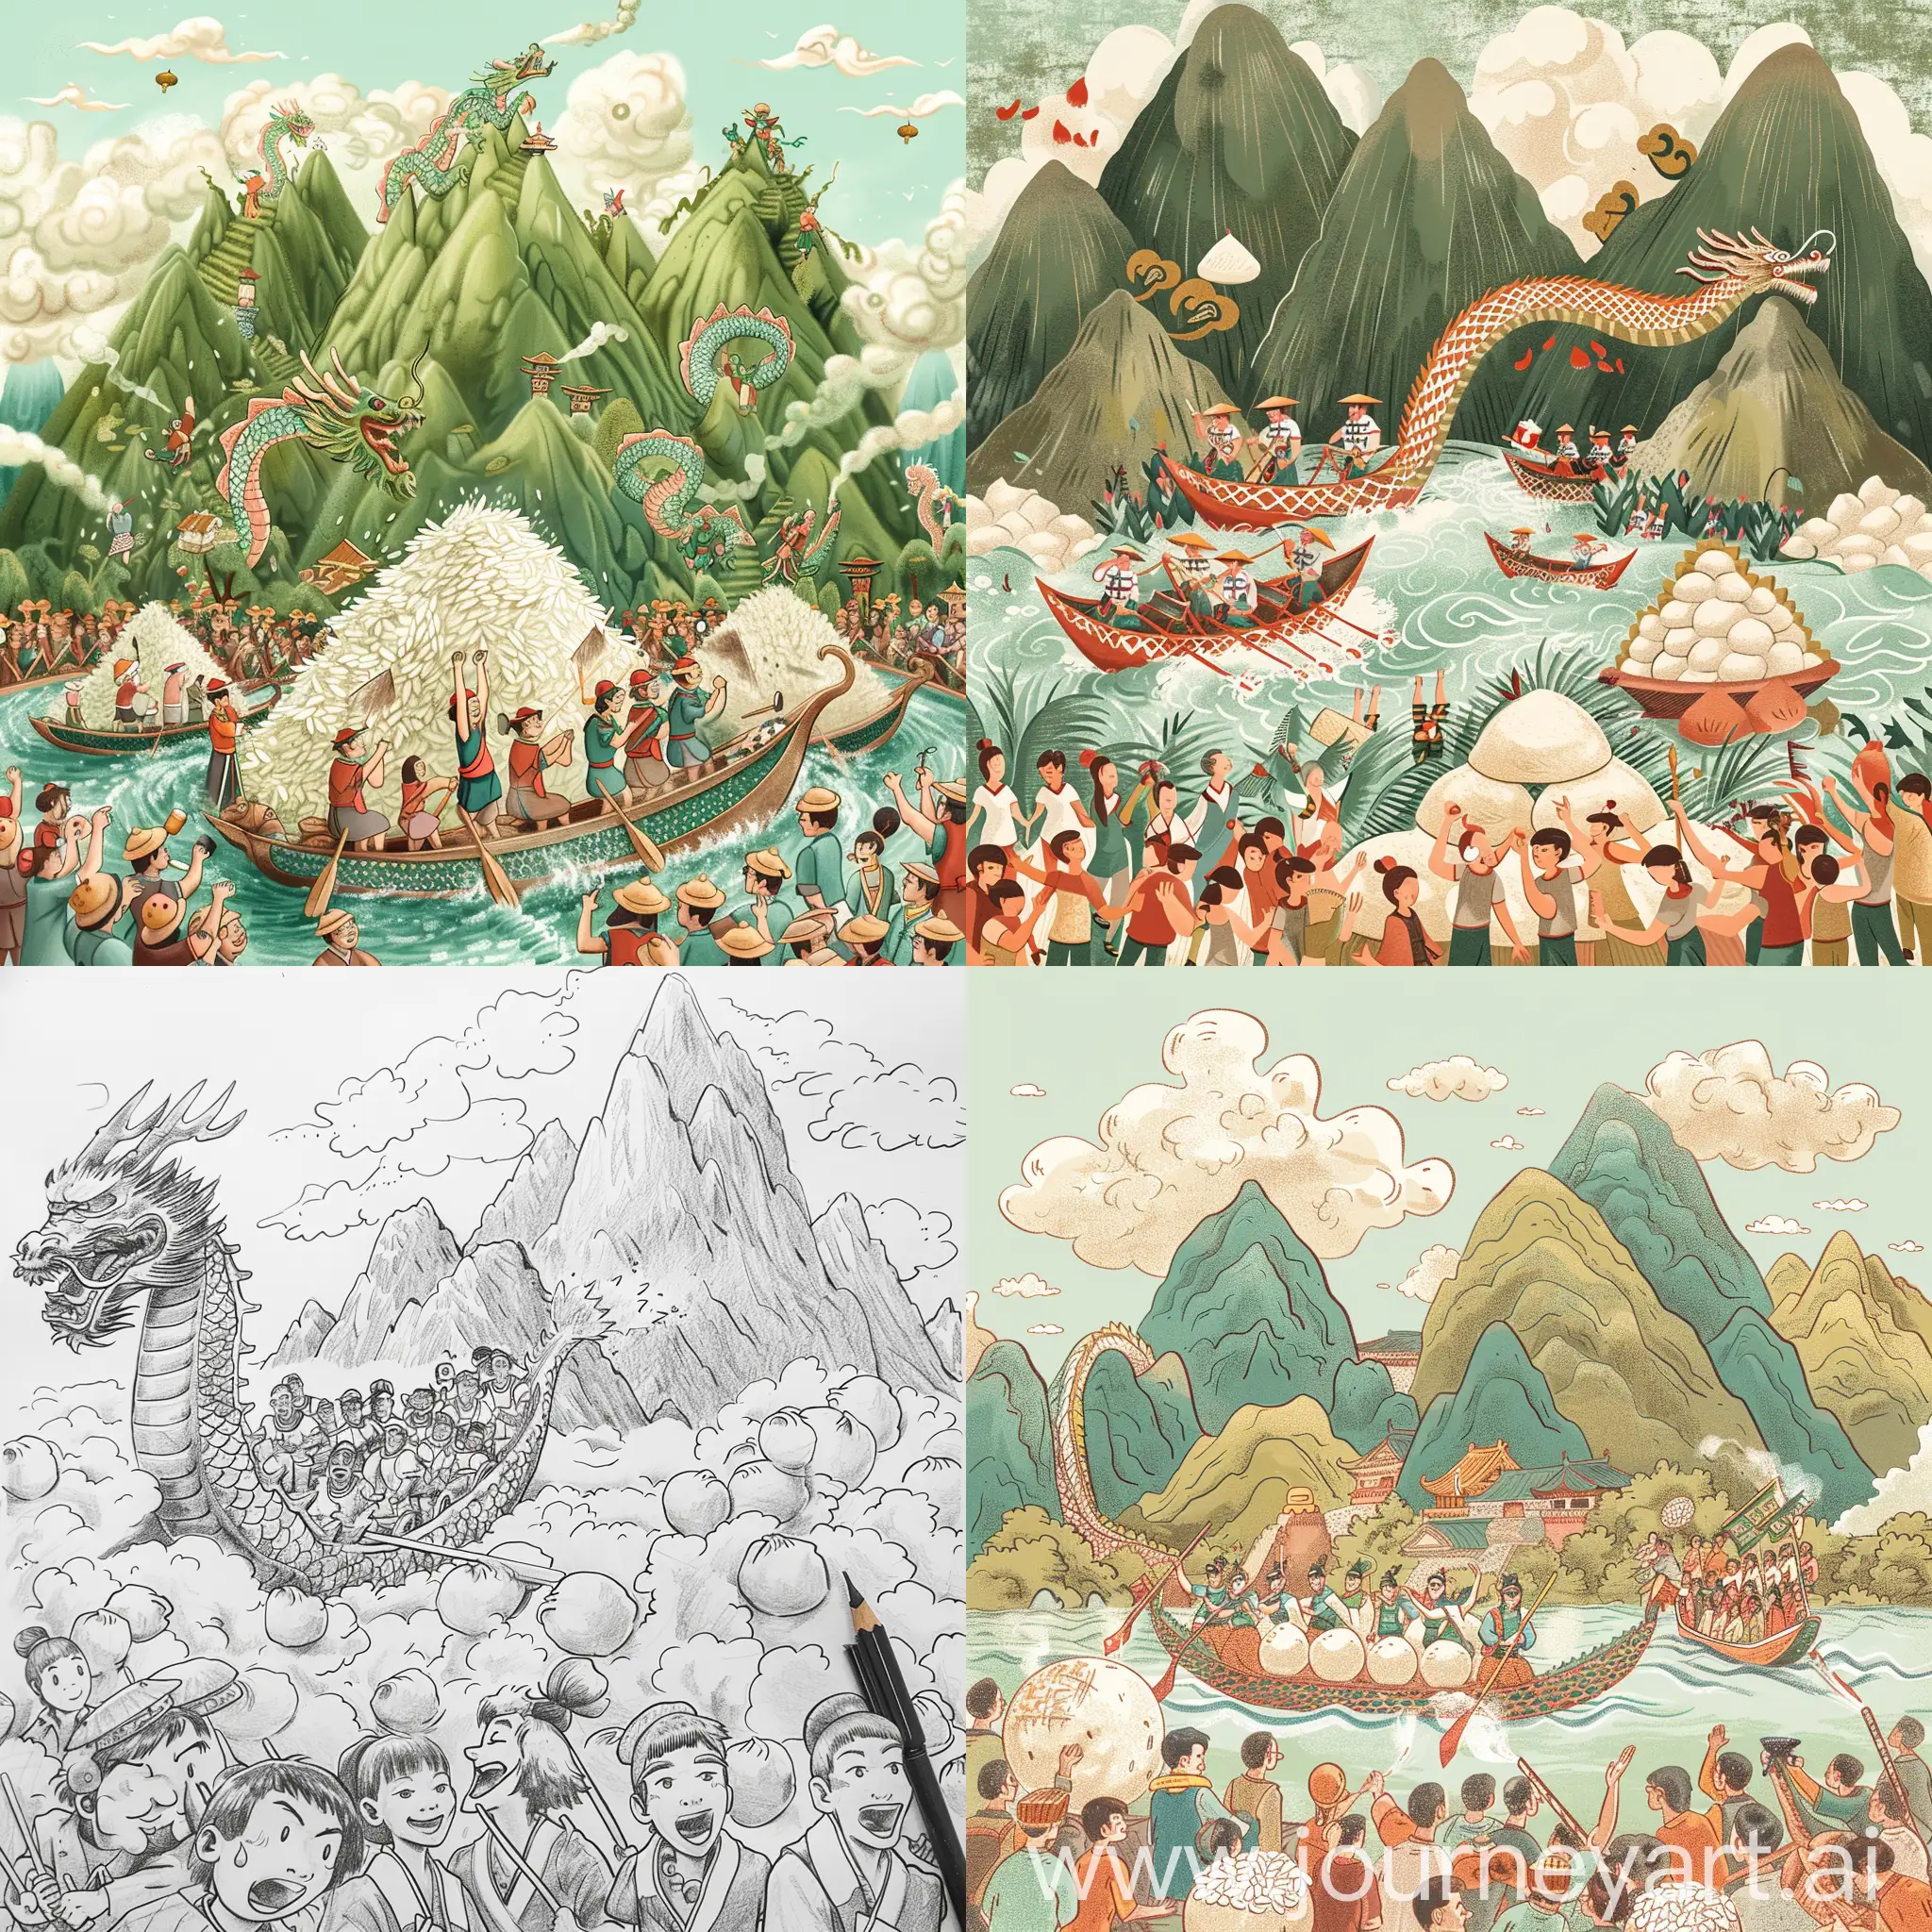 help me draw a very happy day during dragon boat festival, with a group of people having the dragon boat race and at the back the mountains are rice dumplings and at the front a crowd of people are happily looking